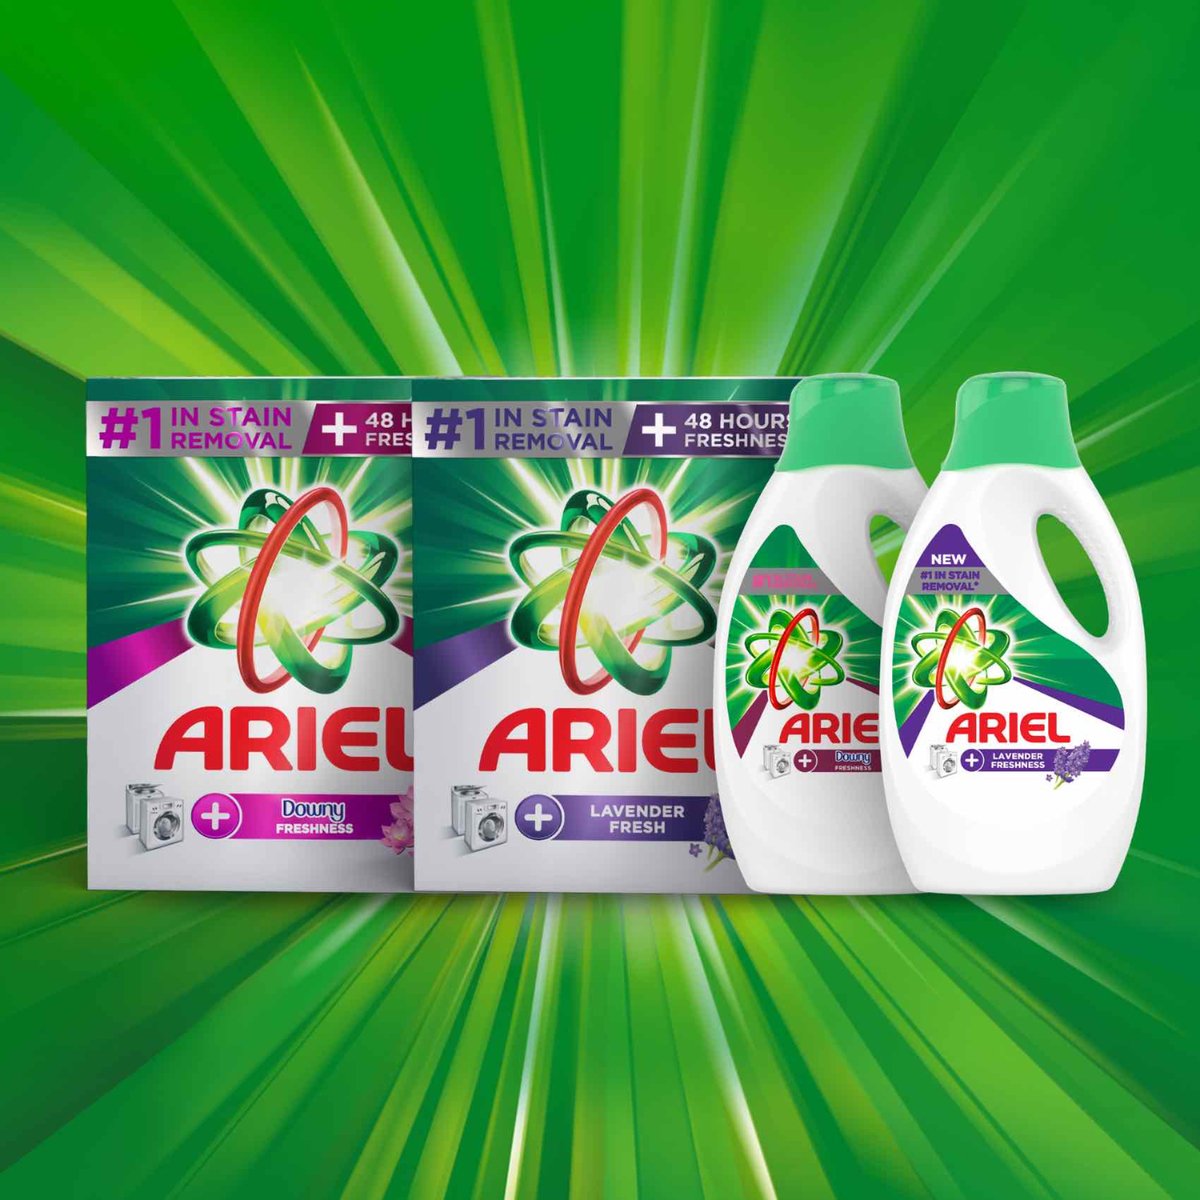 Ariel Automatic Downy Fresh Laundry Detergent Powder, Number 1 in Stain Removal with 48 Hours of Freshness, 6.25 kg